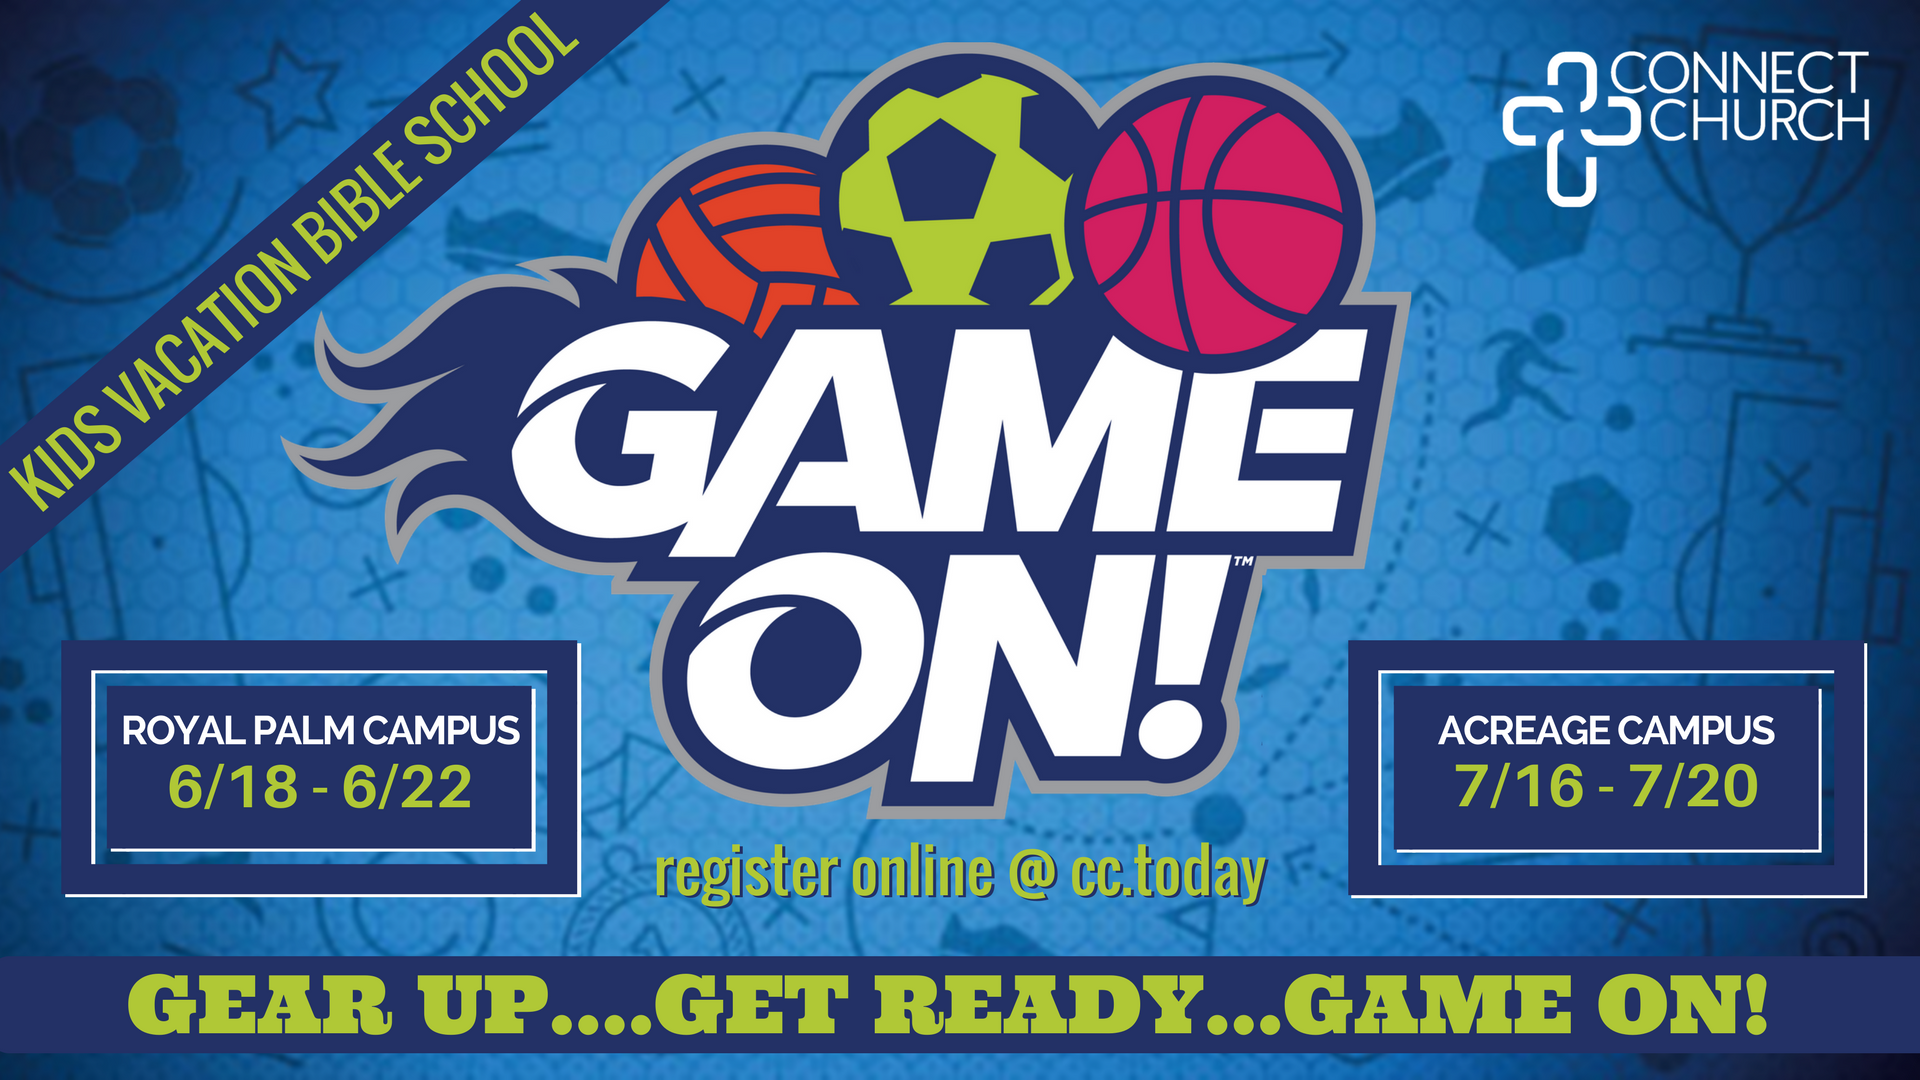 Vacation Bible School (VBS) - GAME ON! (Royal Palm campus) | Connect ...